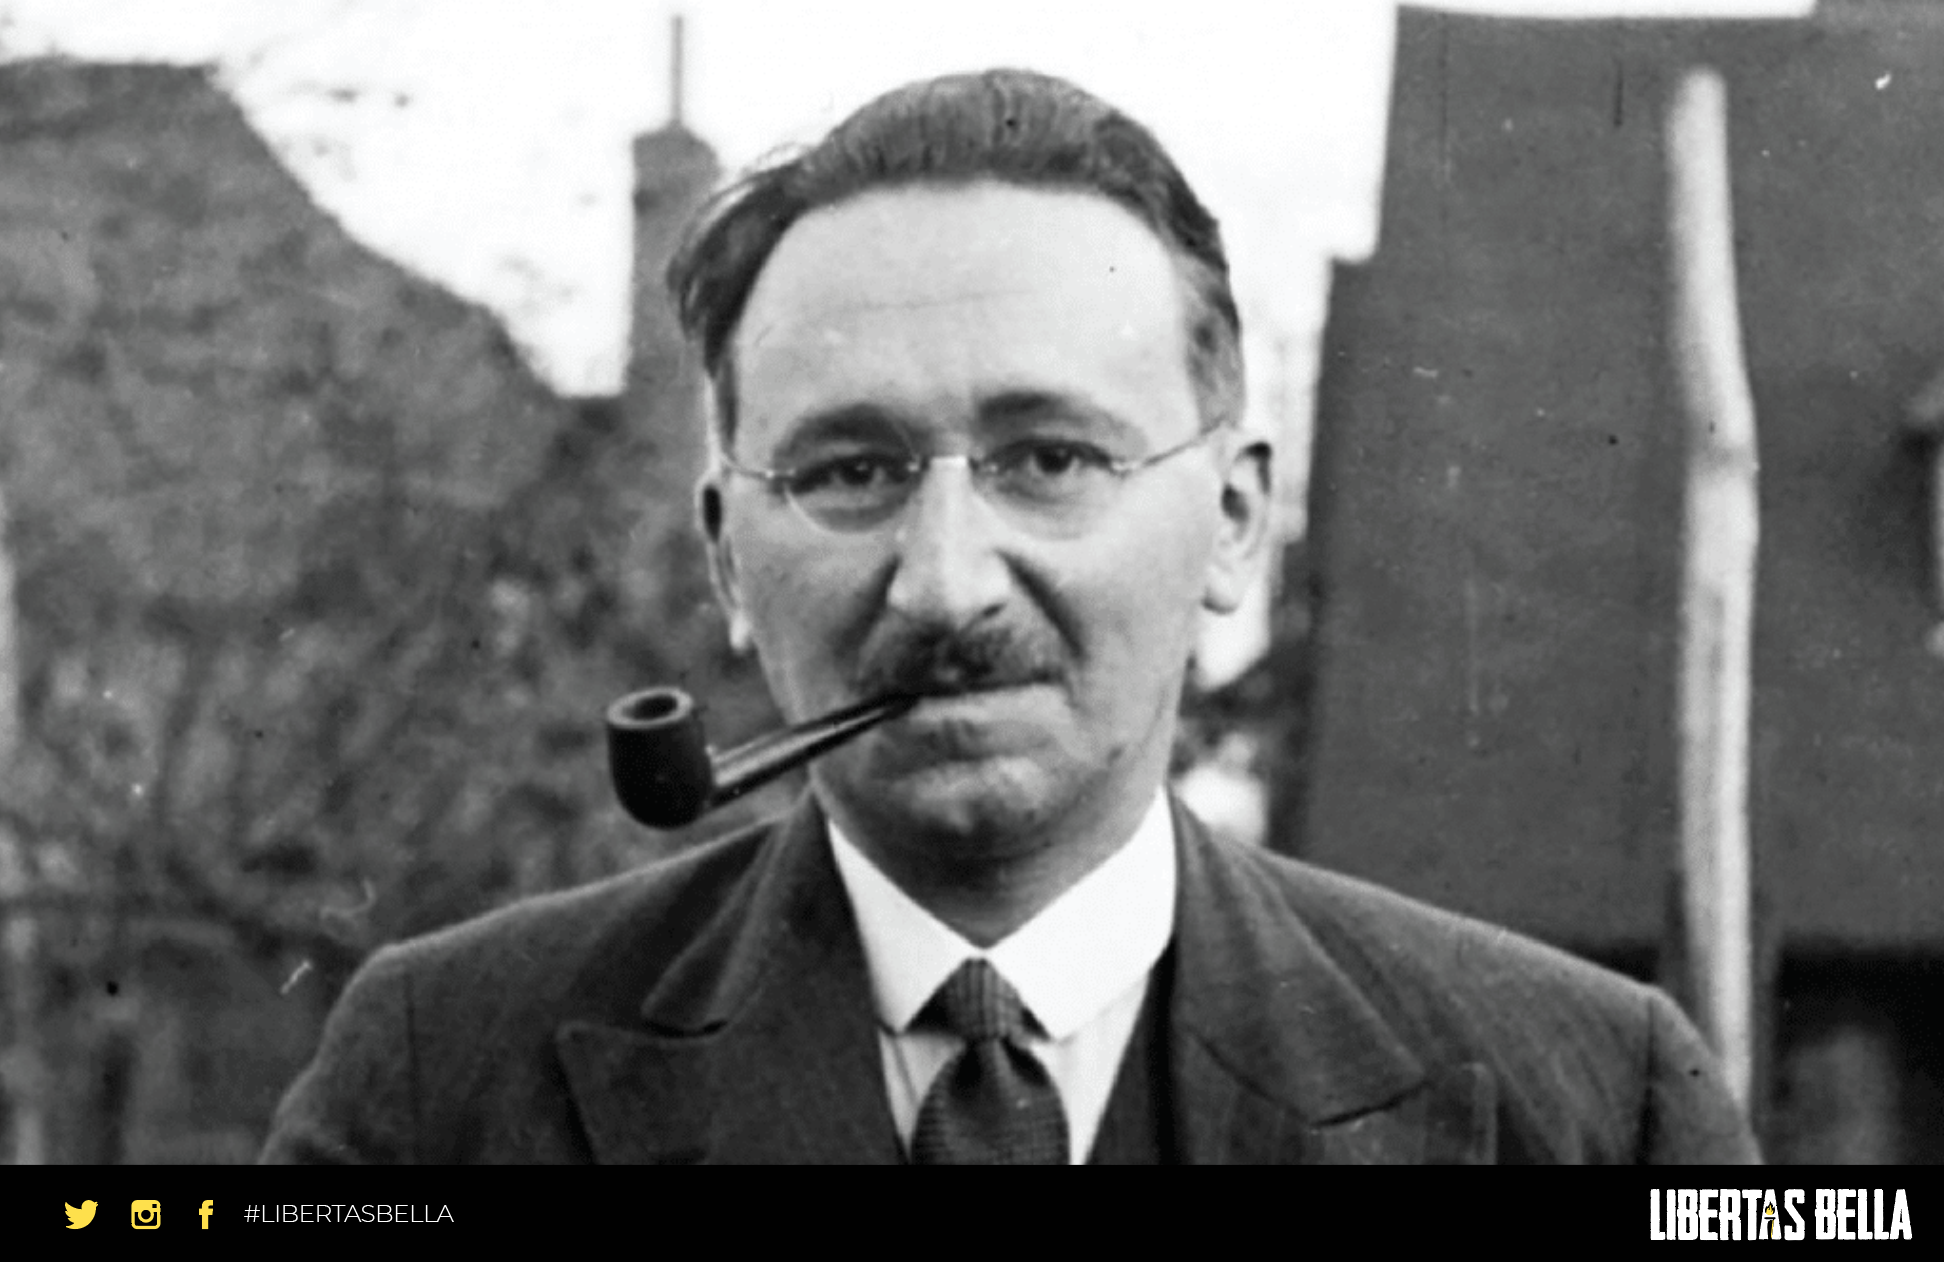 Friedrich Hayek quotes - grayscale version of Friedrich Hayek with a pipe in his mouth